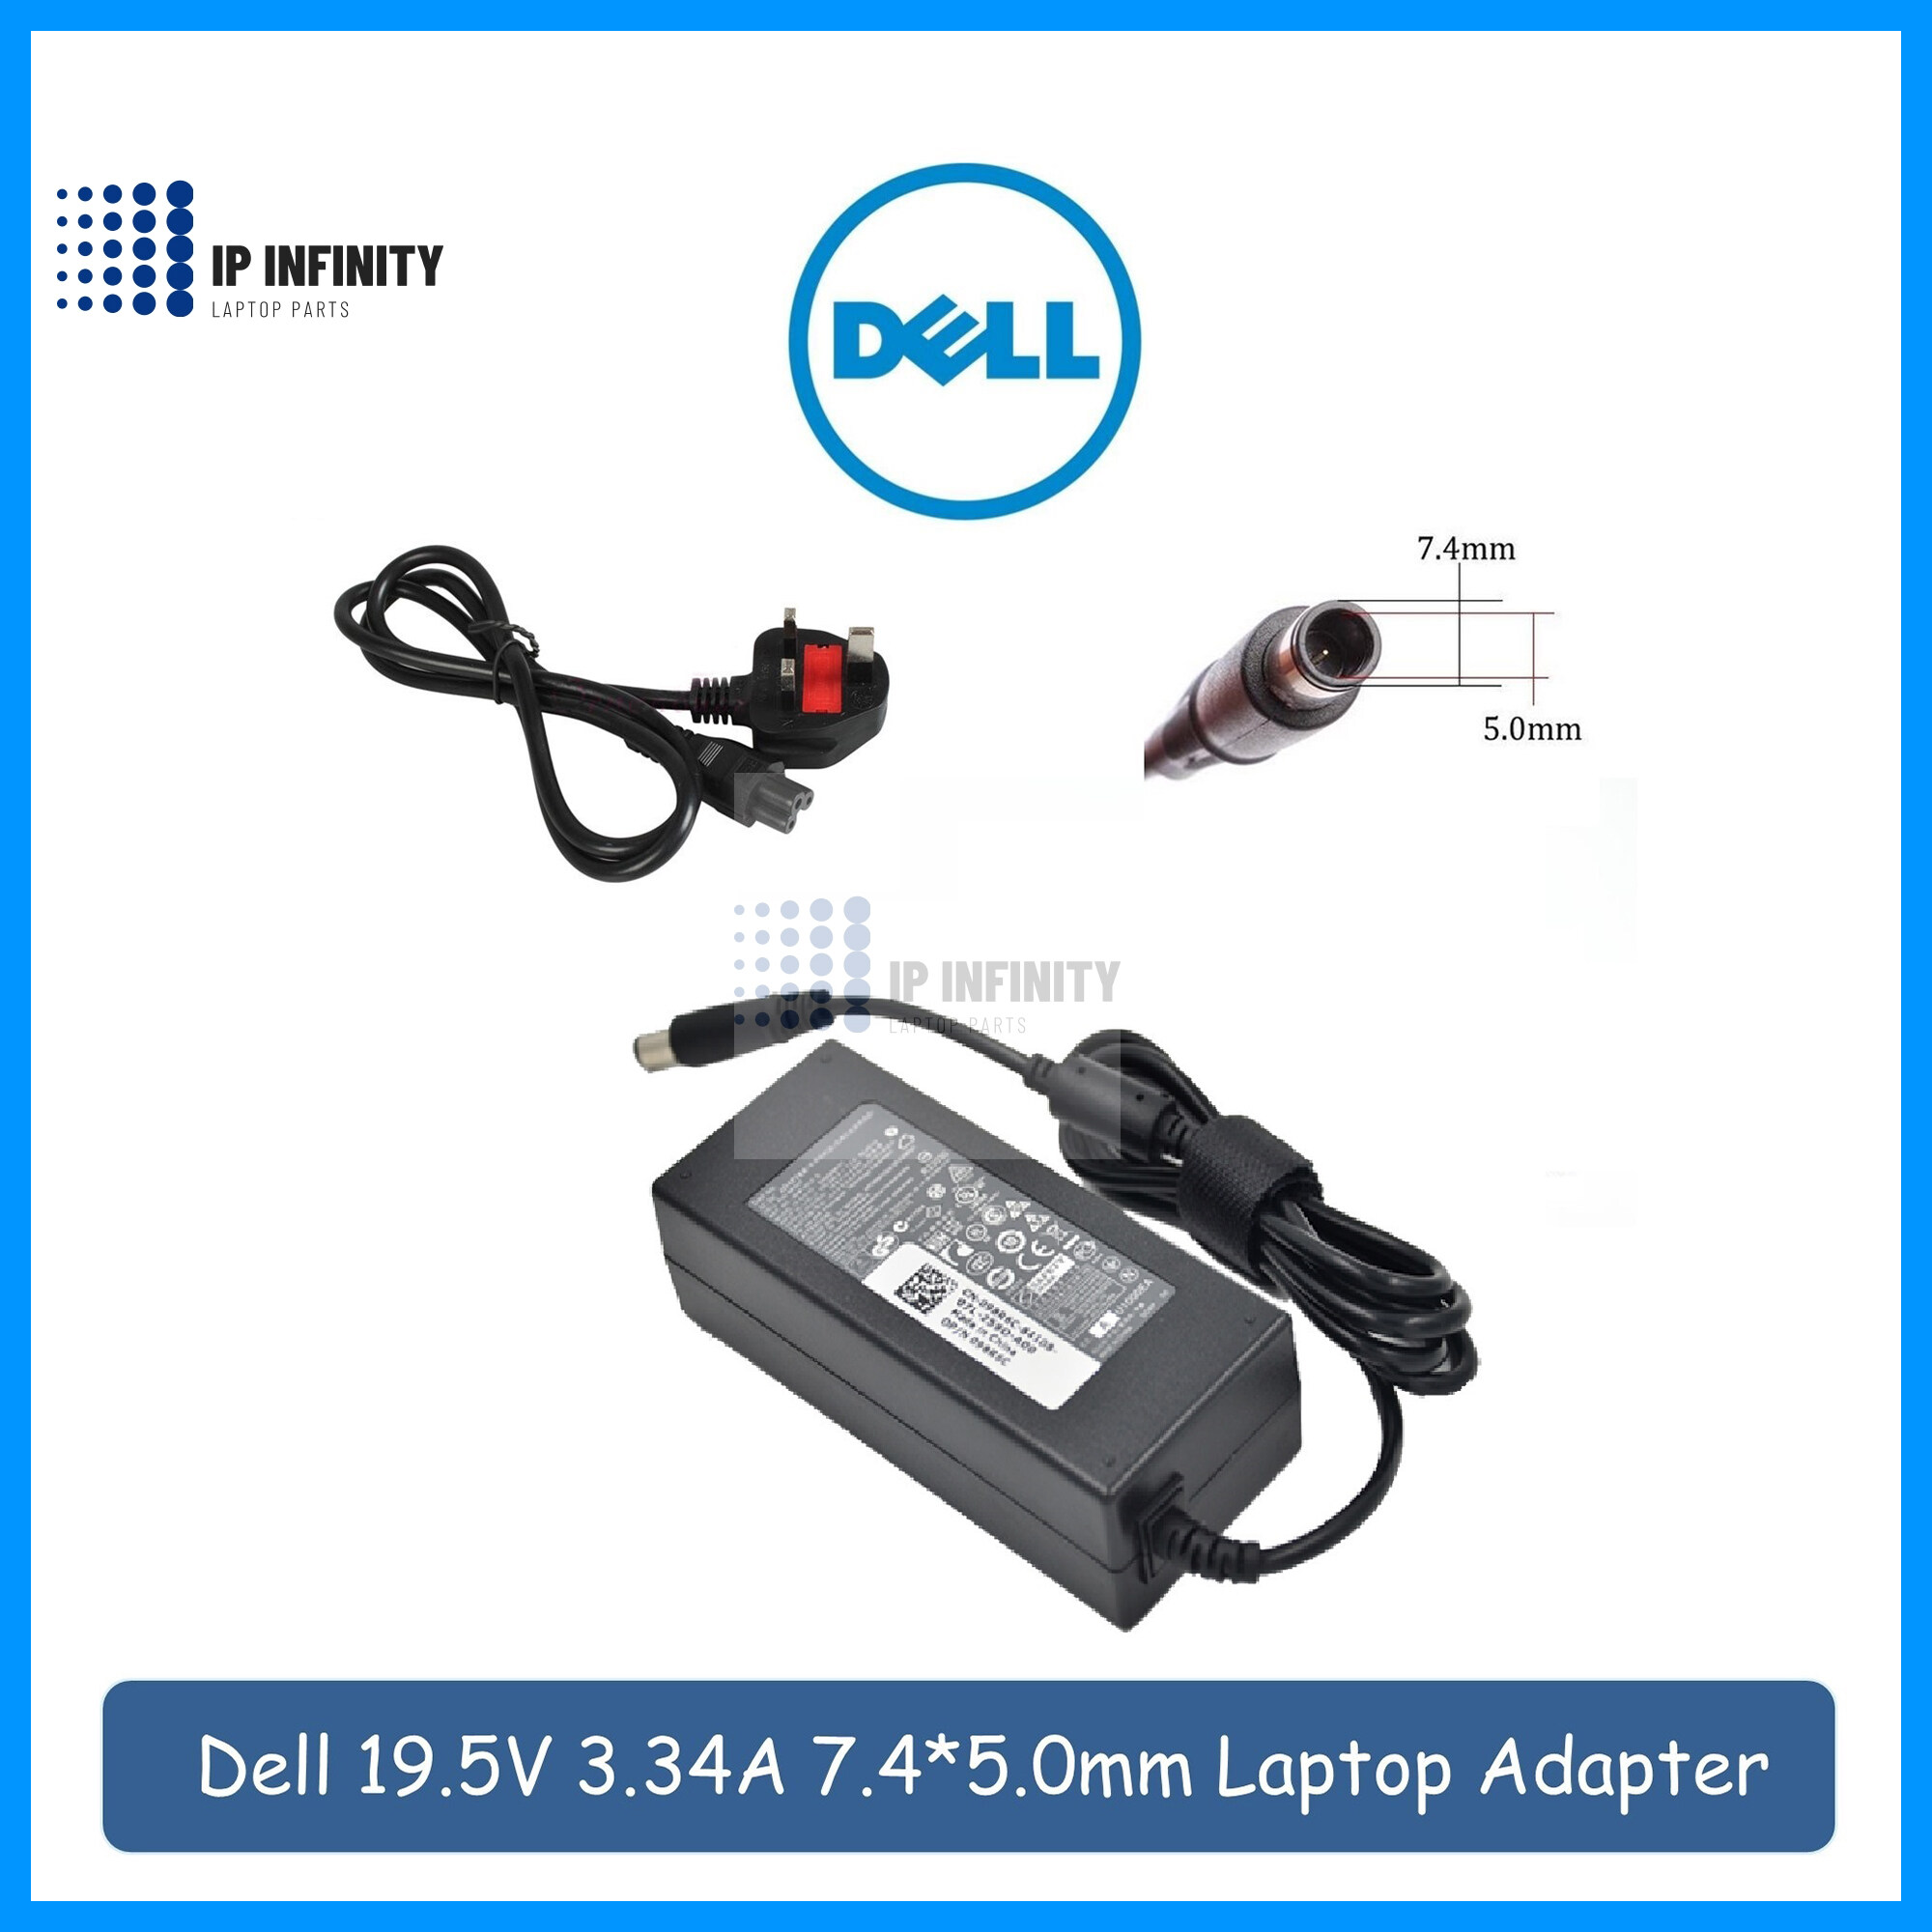 DELL * VOSTRO 13 1300 1310 1310N 1320 1400 1400N CHROMEBOOK 11 3120  3180 3189 LAPTOP CHARGER ADAPTER | Lazada